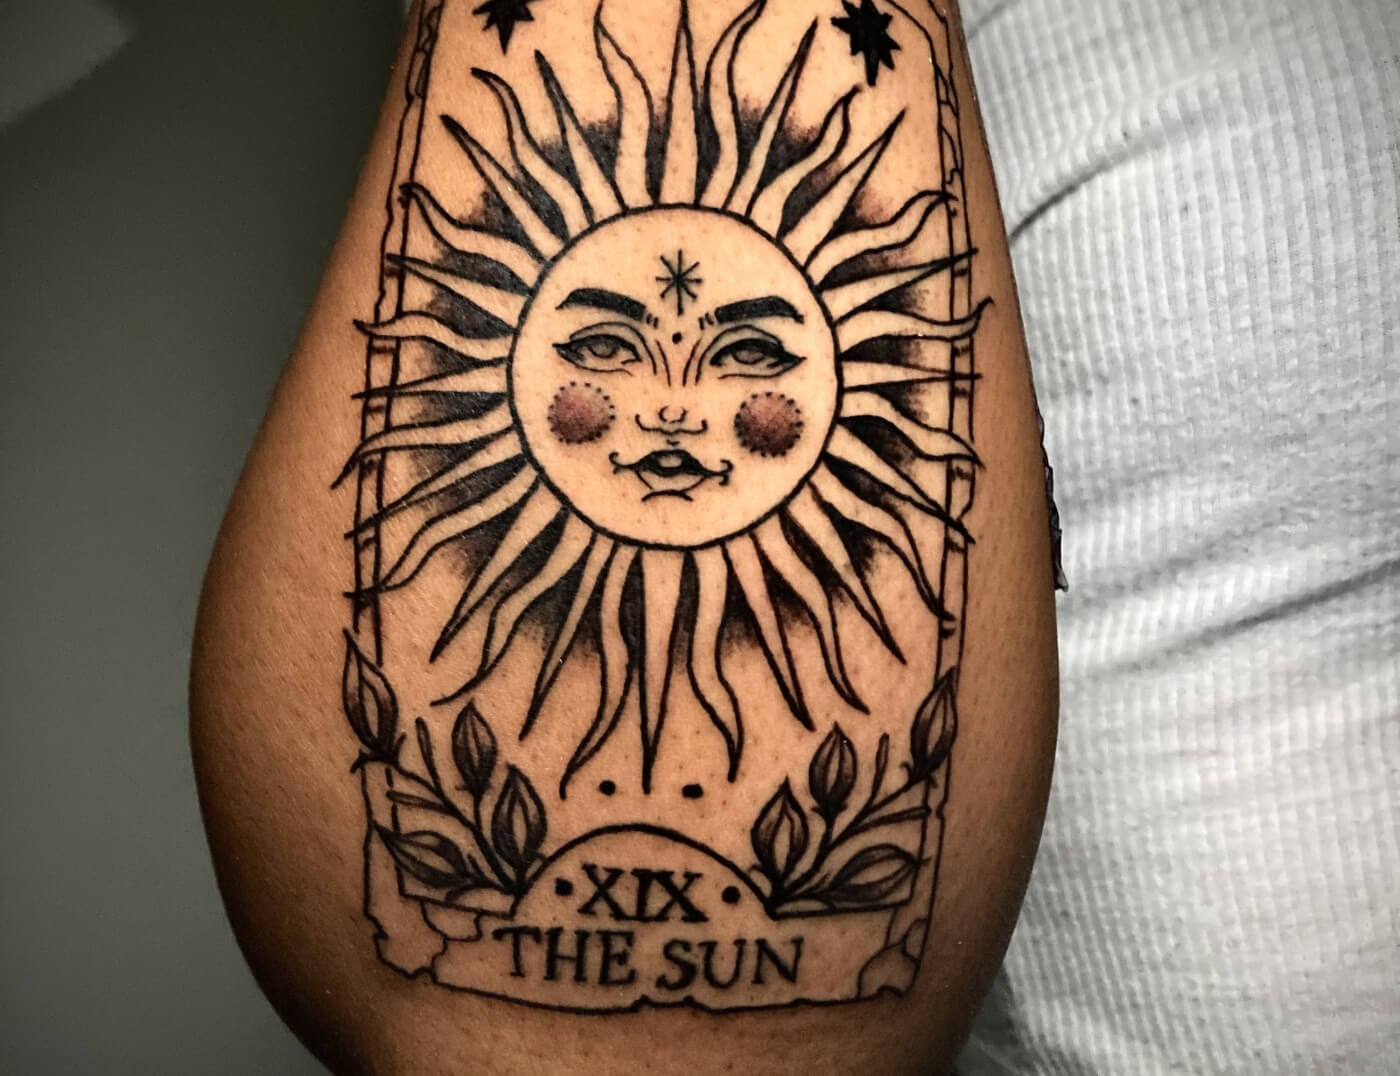 Fine Line Sun Tarot Card Tattoo By Funk Tha World At Iron Palm Tattoos & Body Piercing. We're open late most nights until 2 A.M. Call 404-973-7828